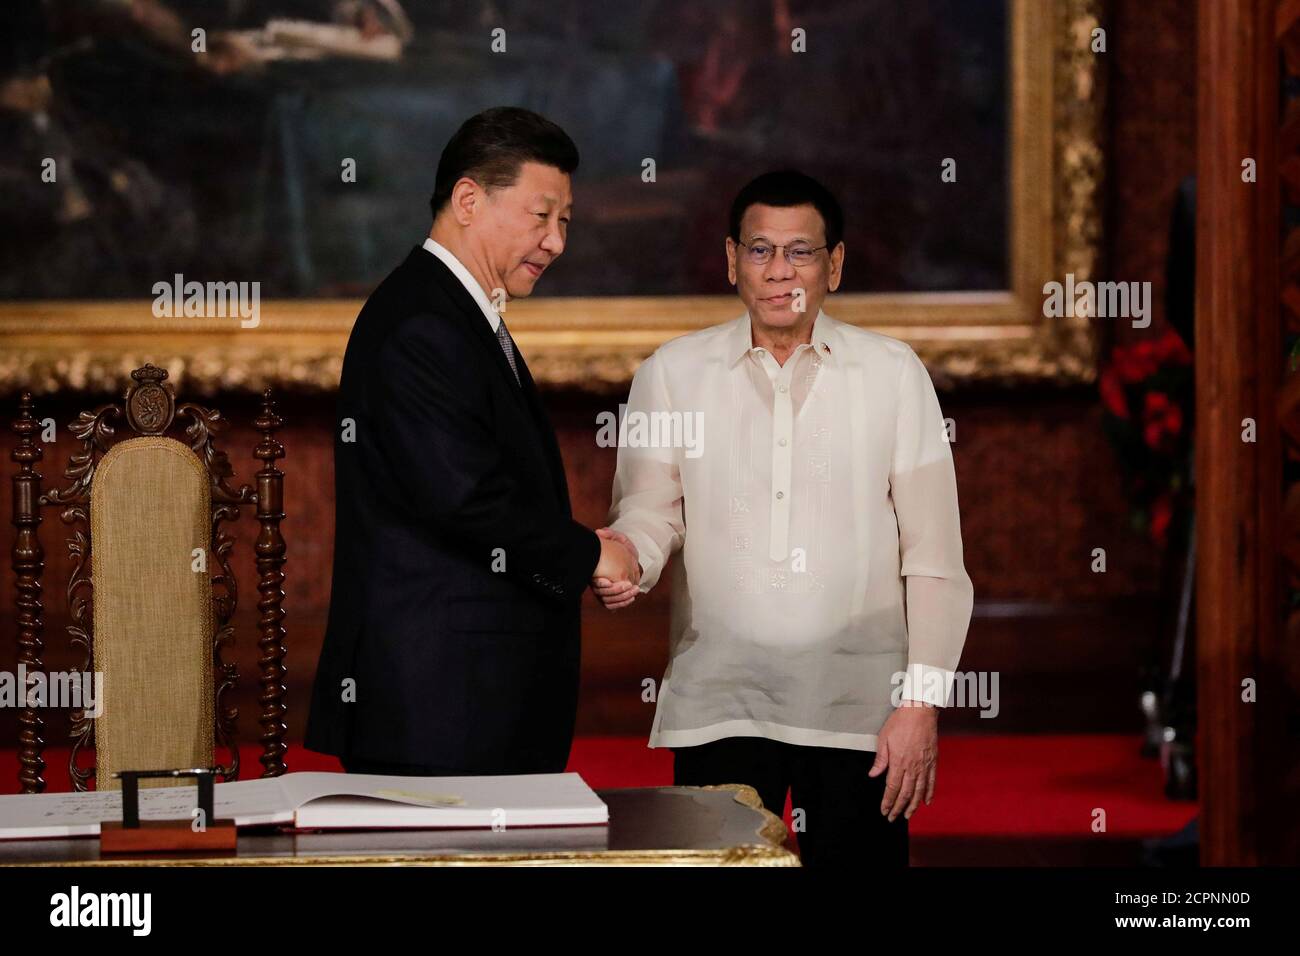 China's President Xi Jinping and Philippine President Rodrigo Duterte shake hands after a book signing at the Malacanang presidential palace in Manila, Philippines, November 20, 2018.  Mark Cristino/Pool via Reuters Stock Photo